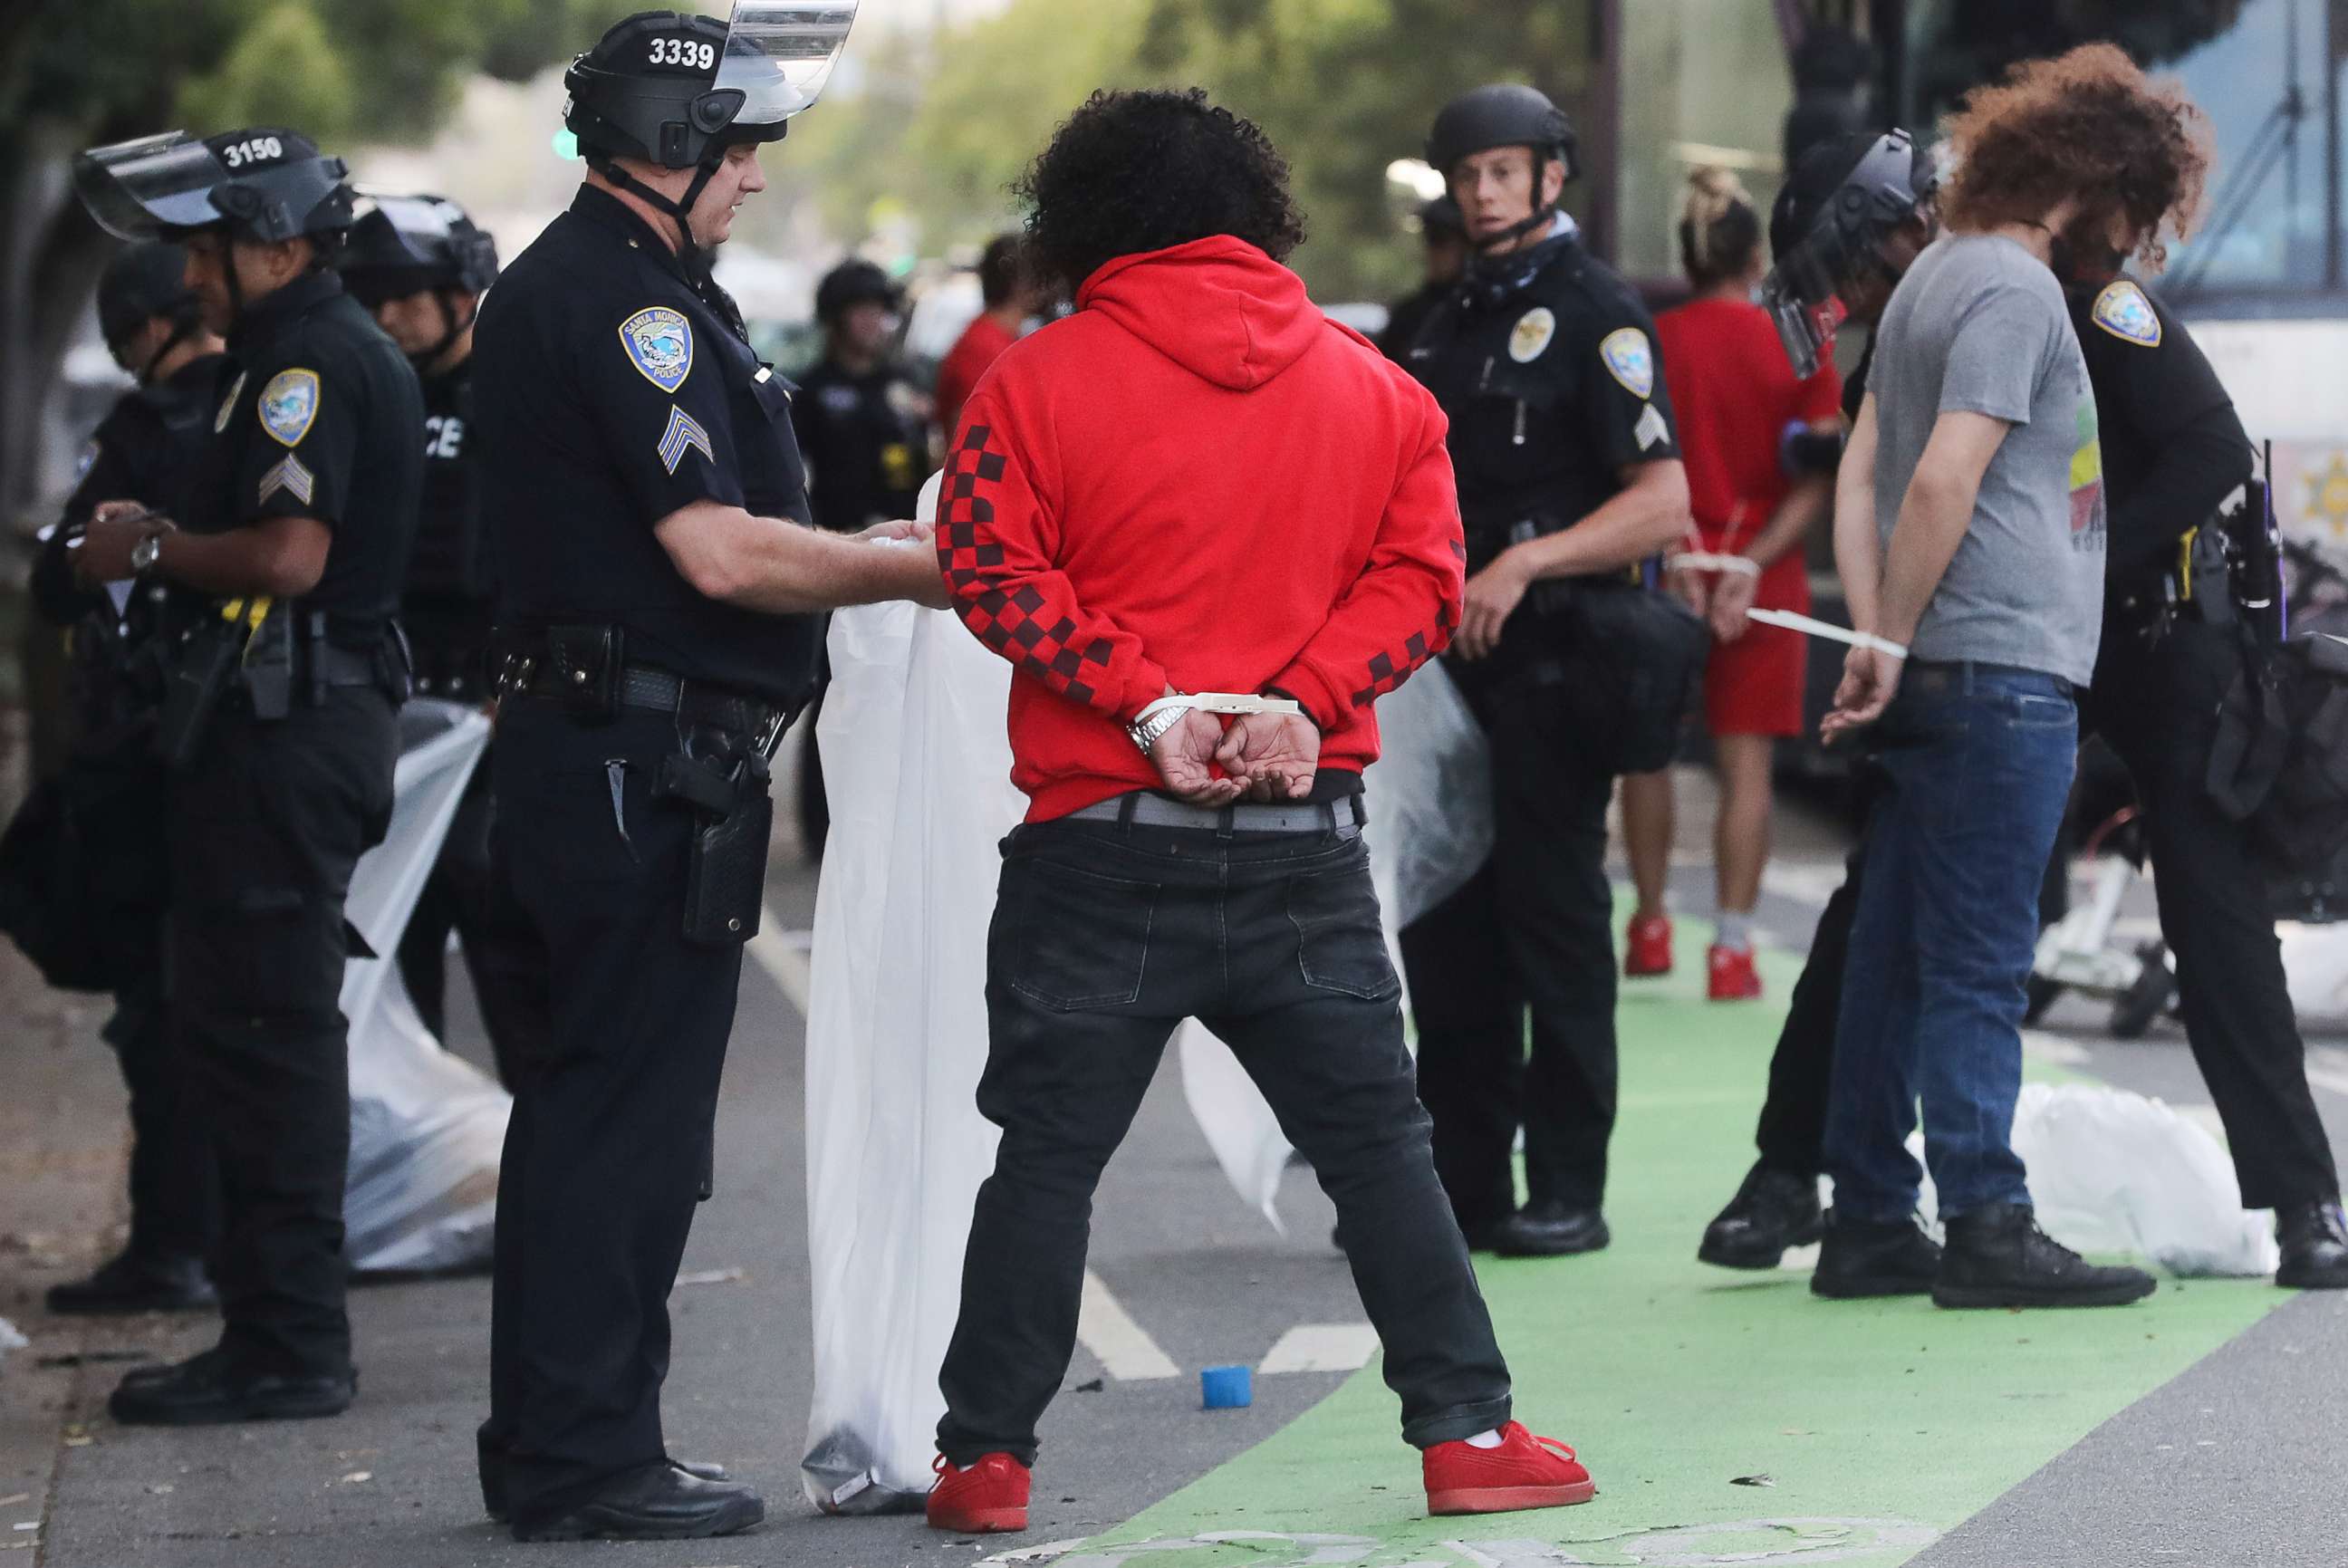 PHOTO: Police arrest people amid demonstrations and some ransacking in the aftermath of George Floyds death, May 31, 2020 in Santa Monica, California.